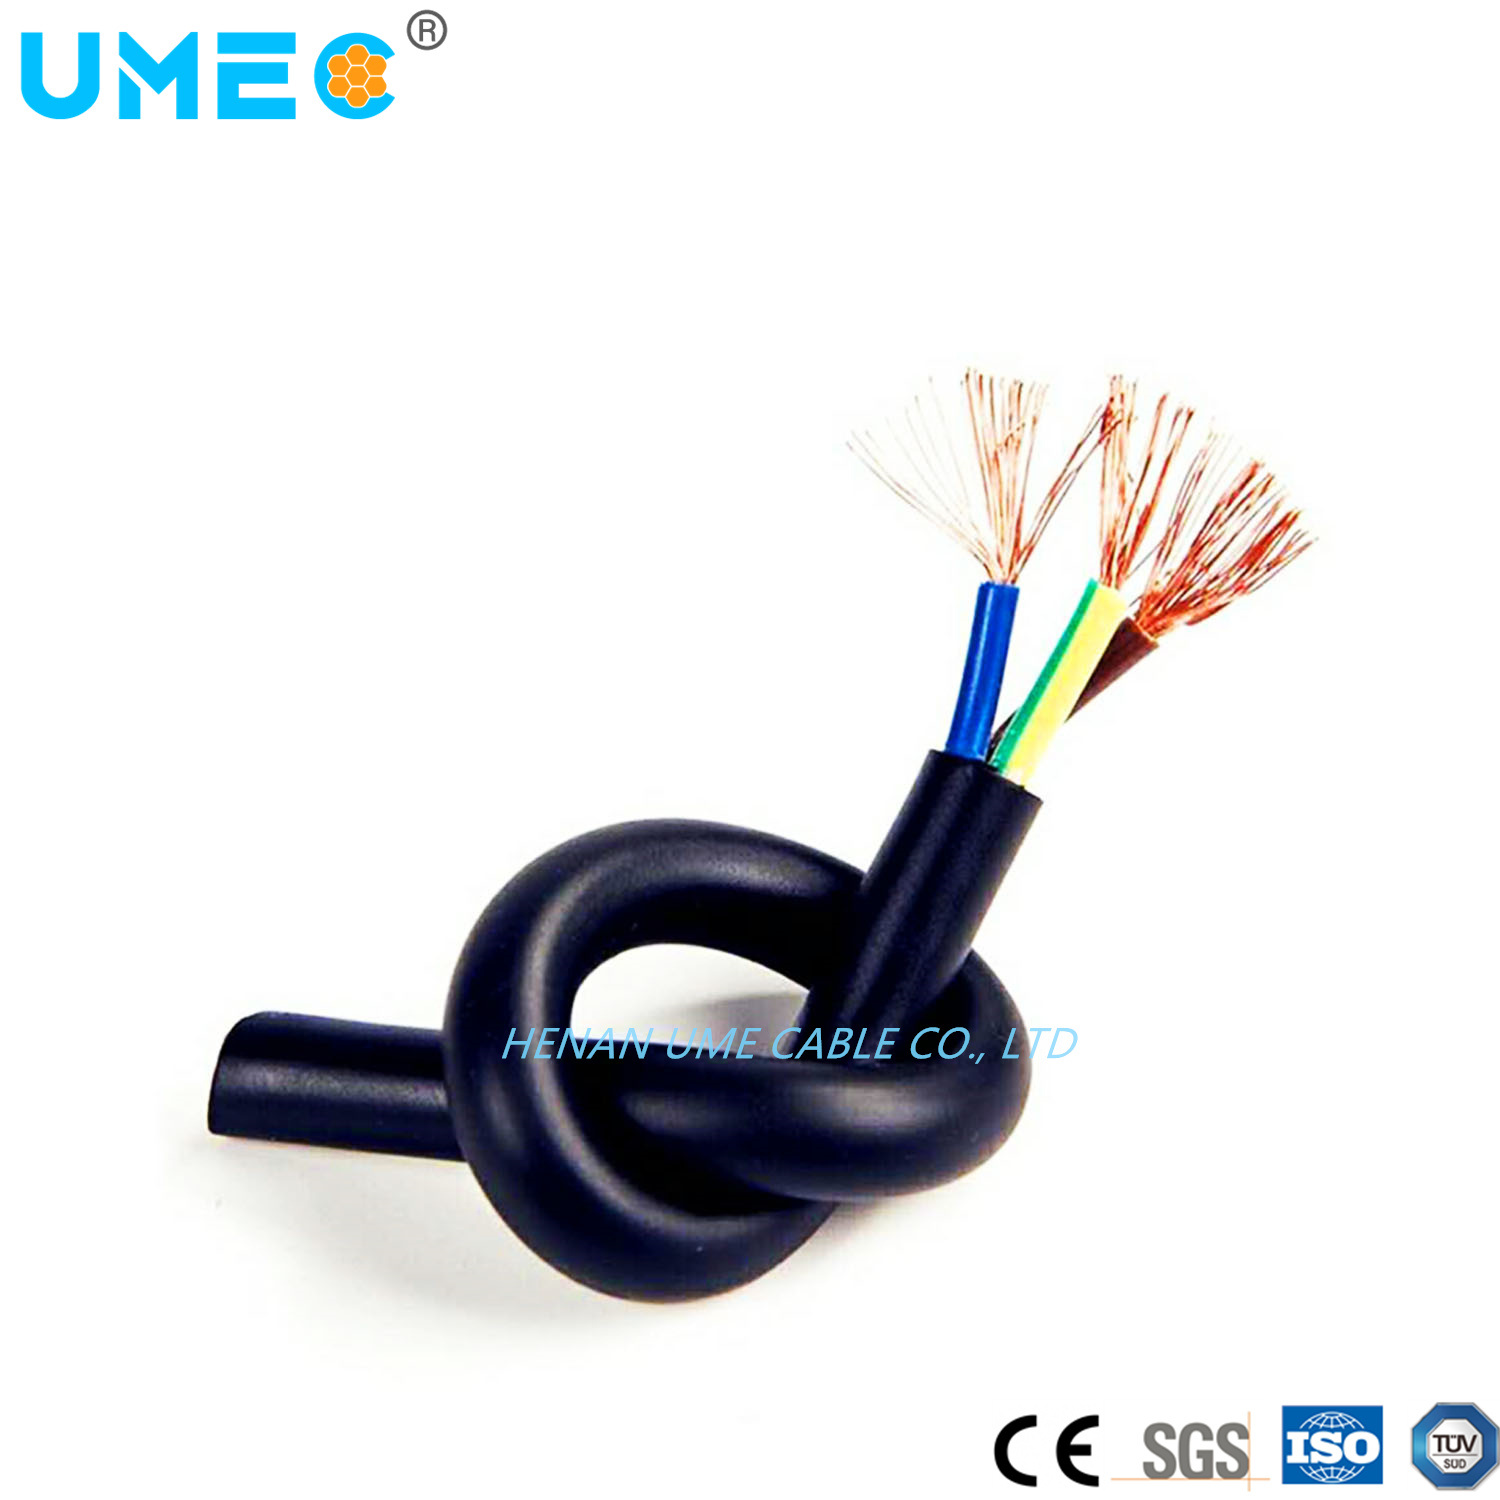 Wholesale Rubber Cable H03rnf H05rnf H05rrf H07rnf 2-3-4-5 Cores Rubber Wire